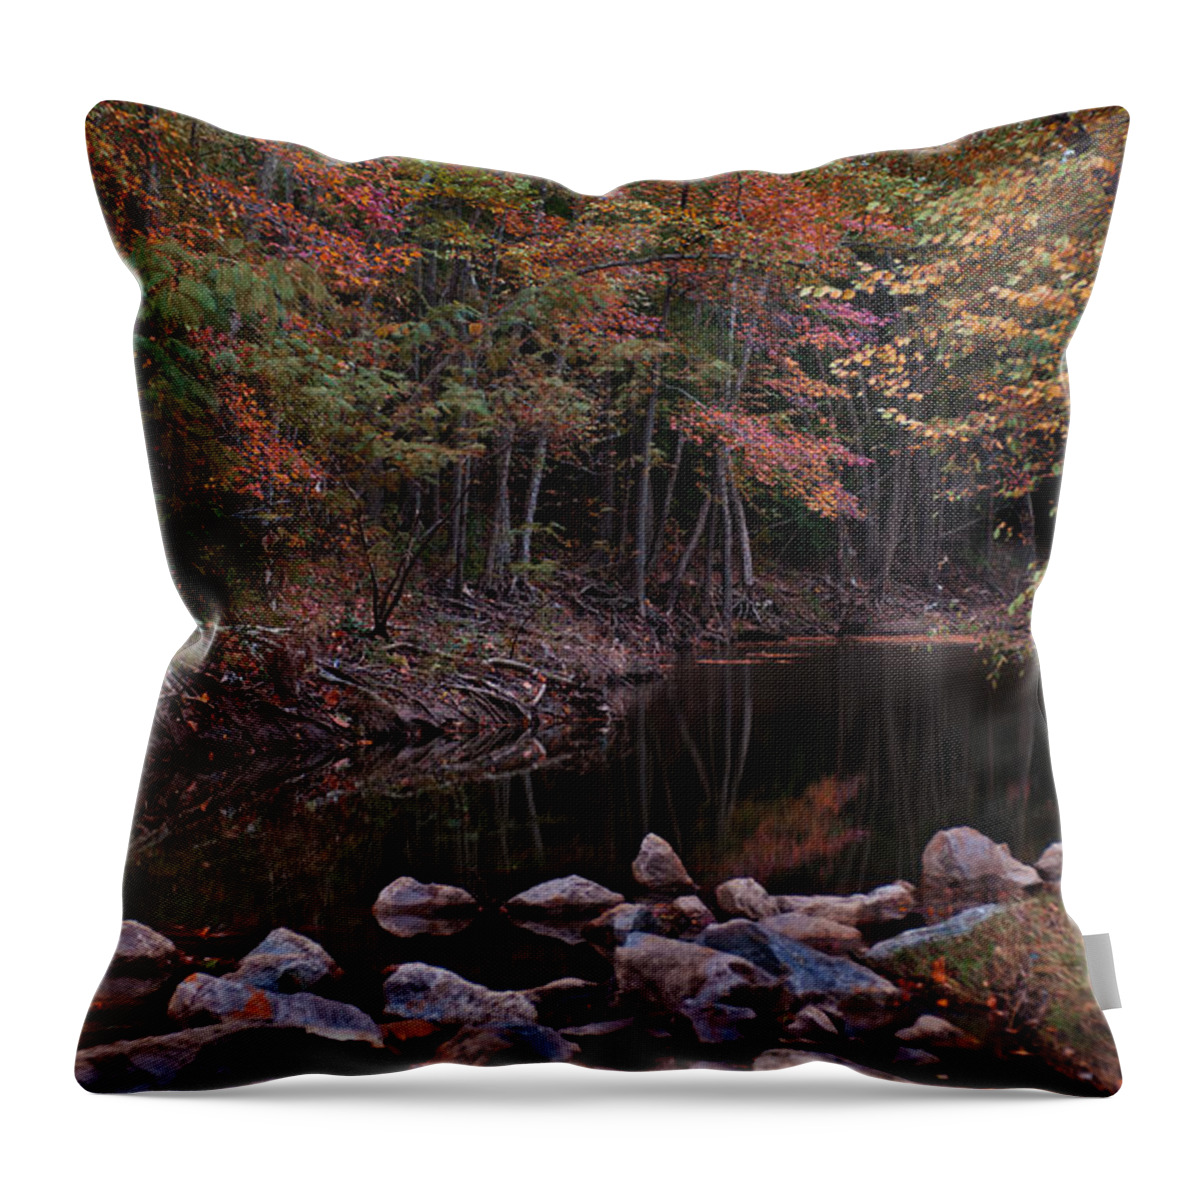 Autumn Throw Pillow featuring the photograph Autumn Leaves Reflecting In the Stream by Todd Aaron